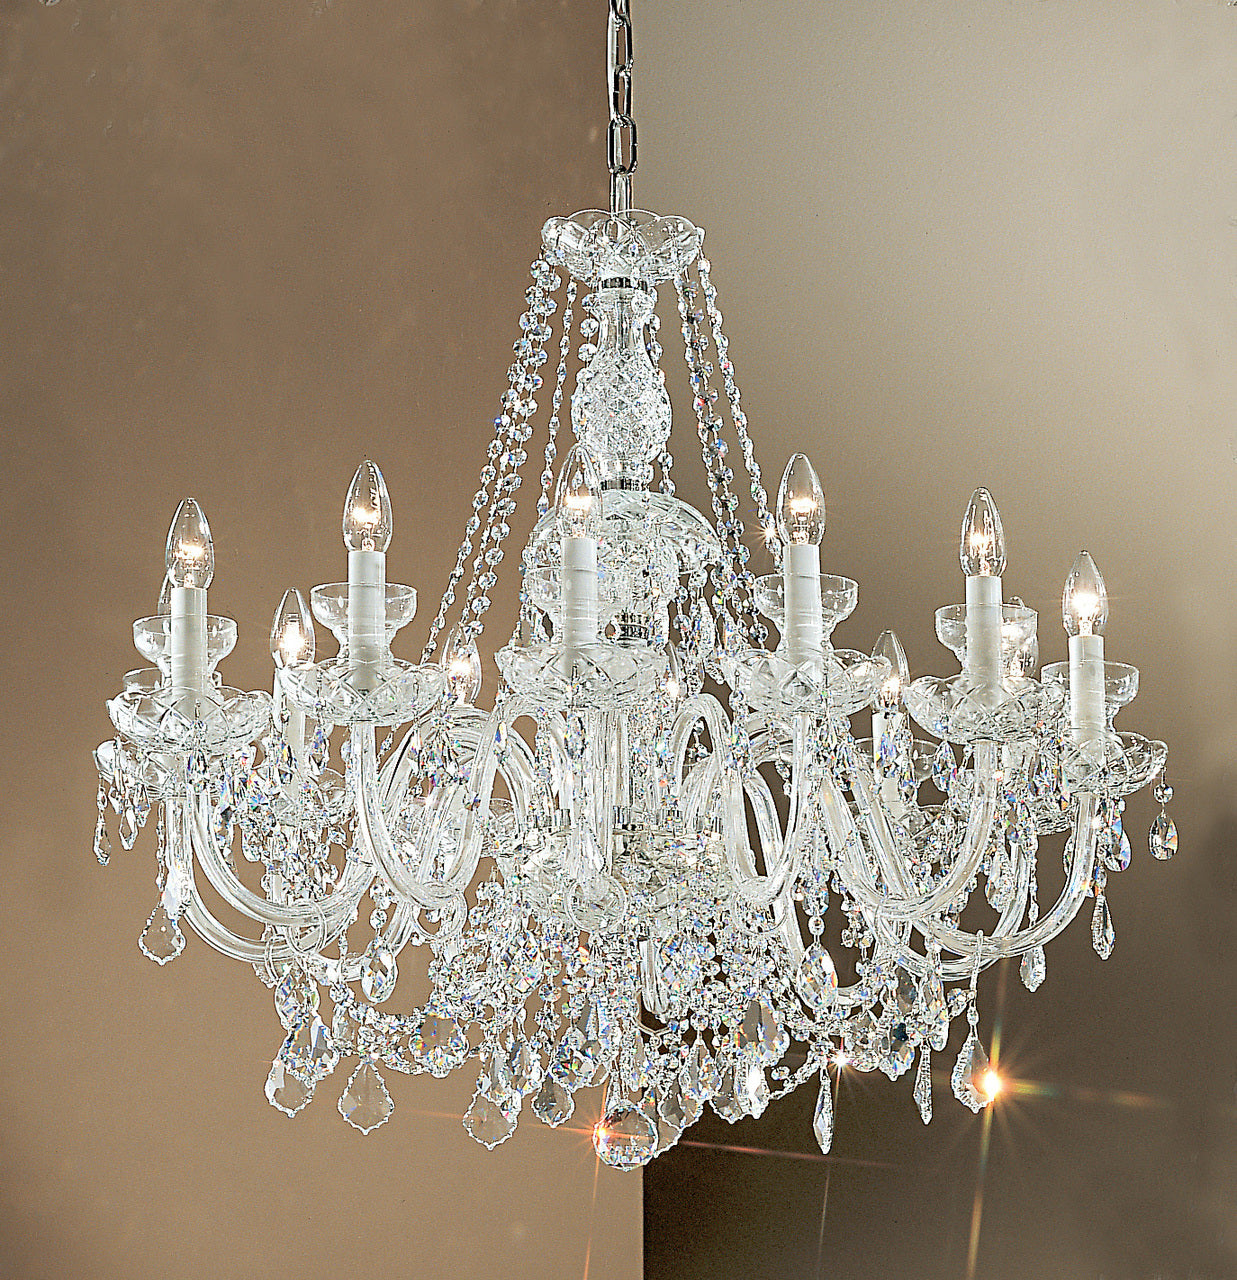 Classic Lighting 8276 CH SC Bohemia Crystal/Glass Chandelier in Chrome (Imported from Italy)